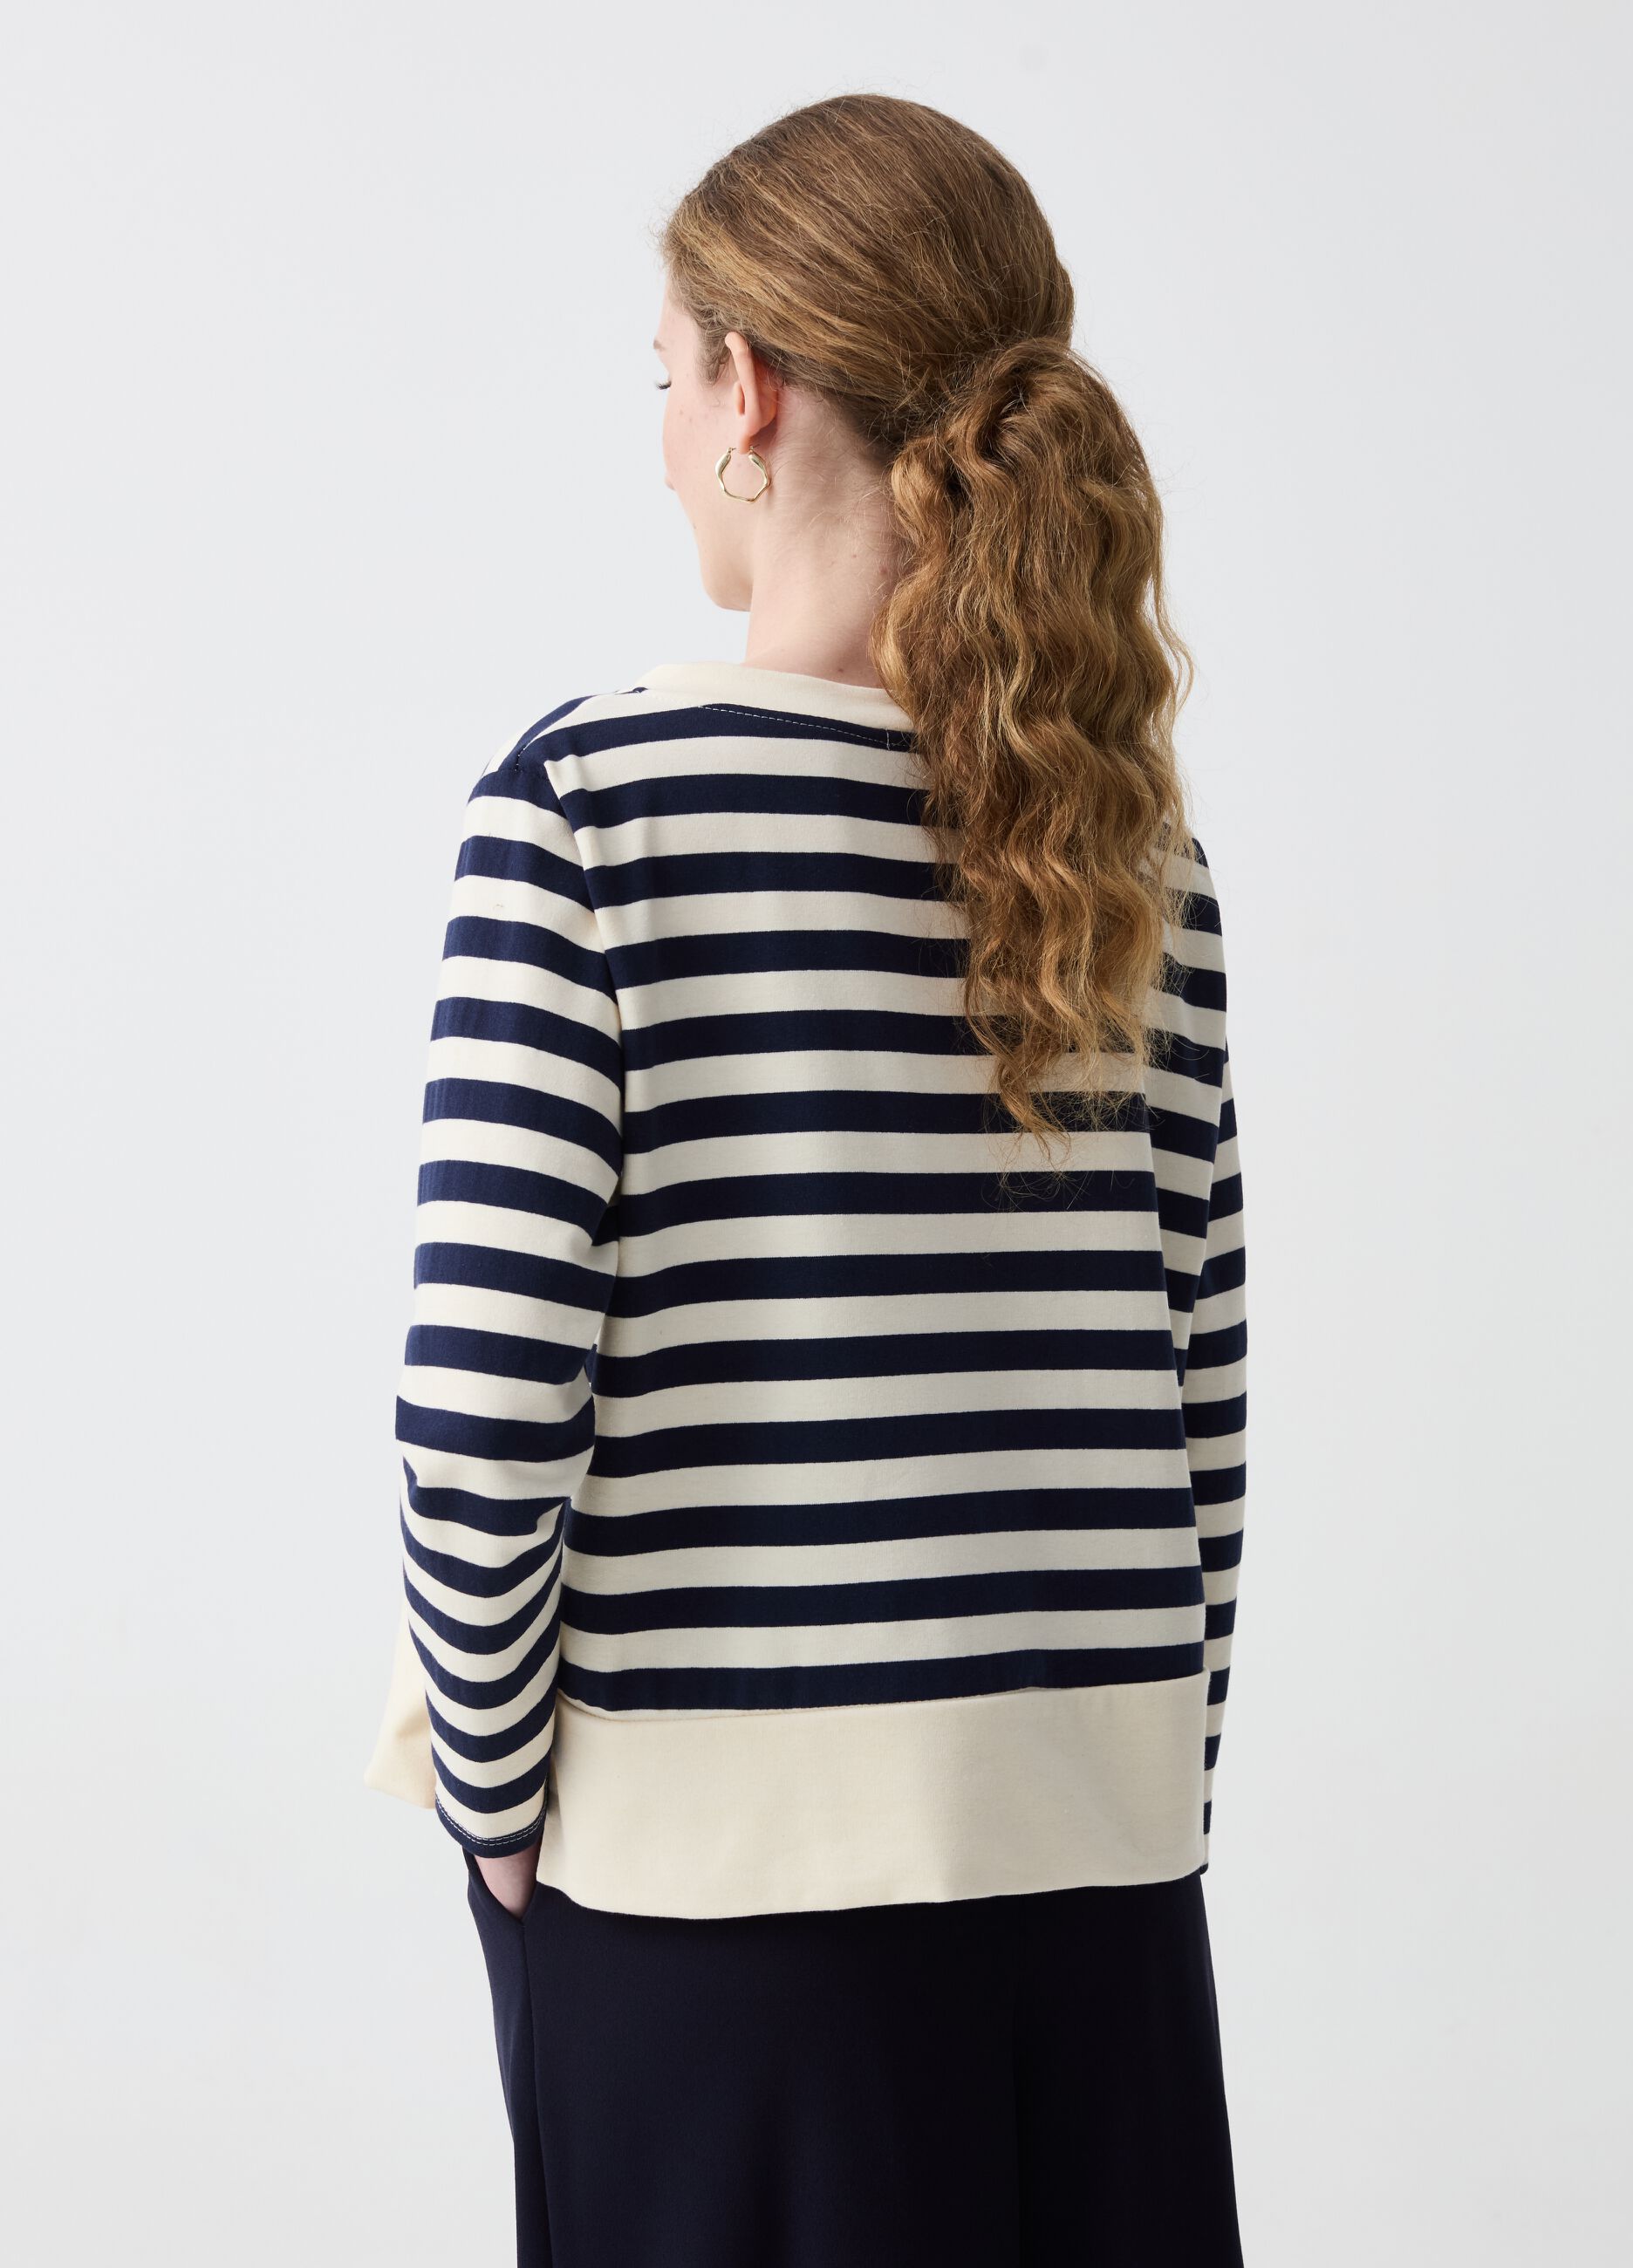 Long-sleeved top with striped pattern